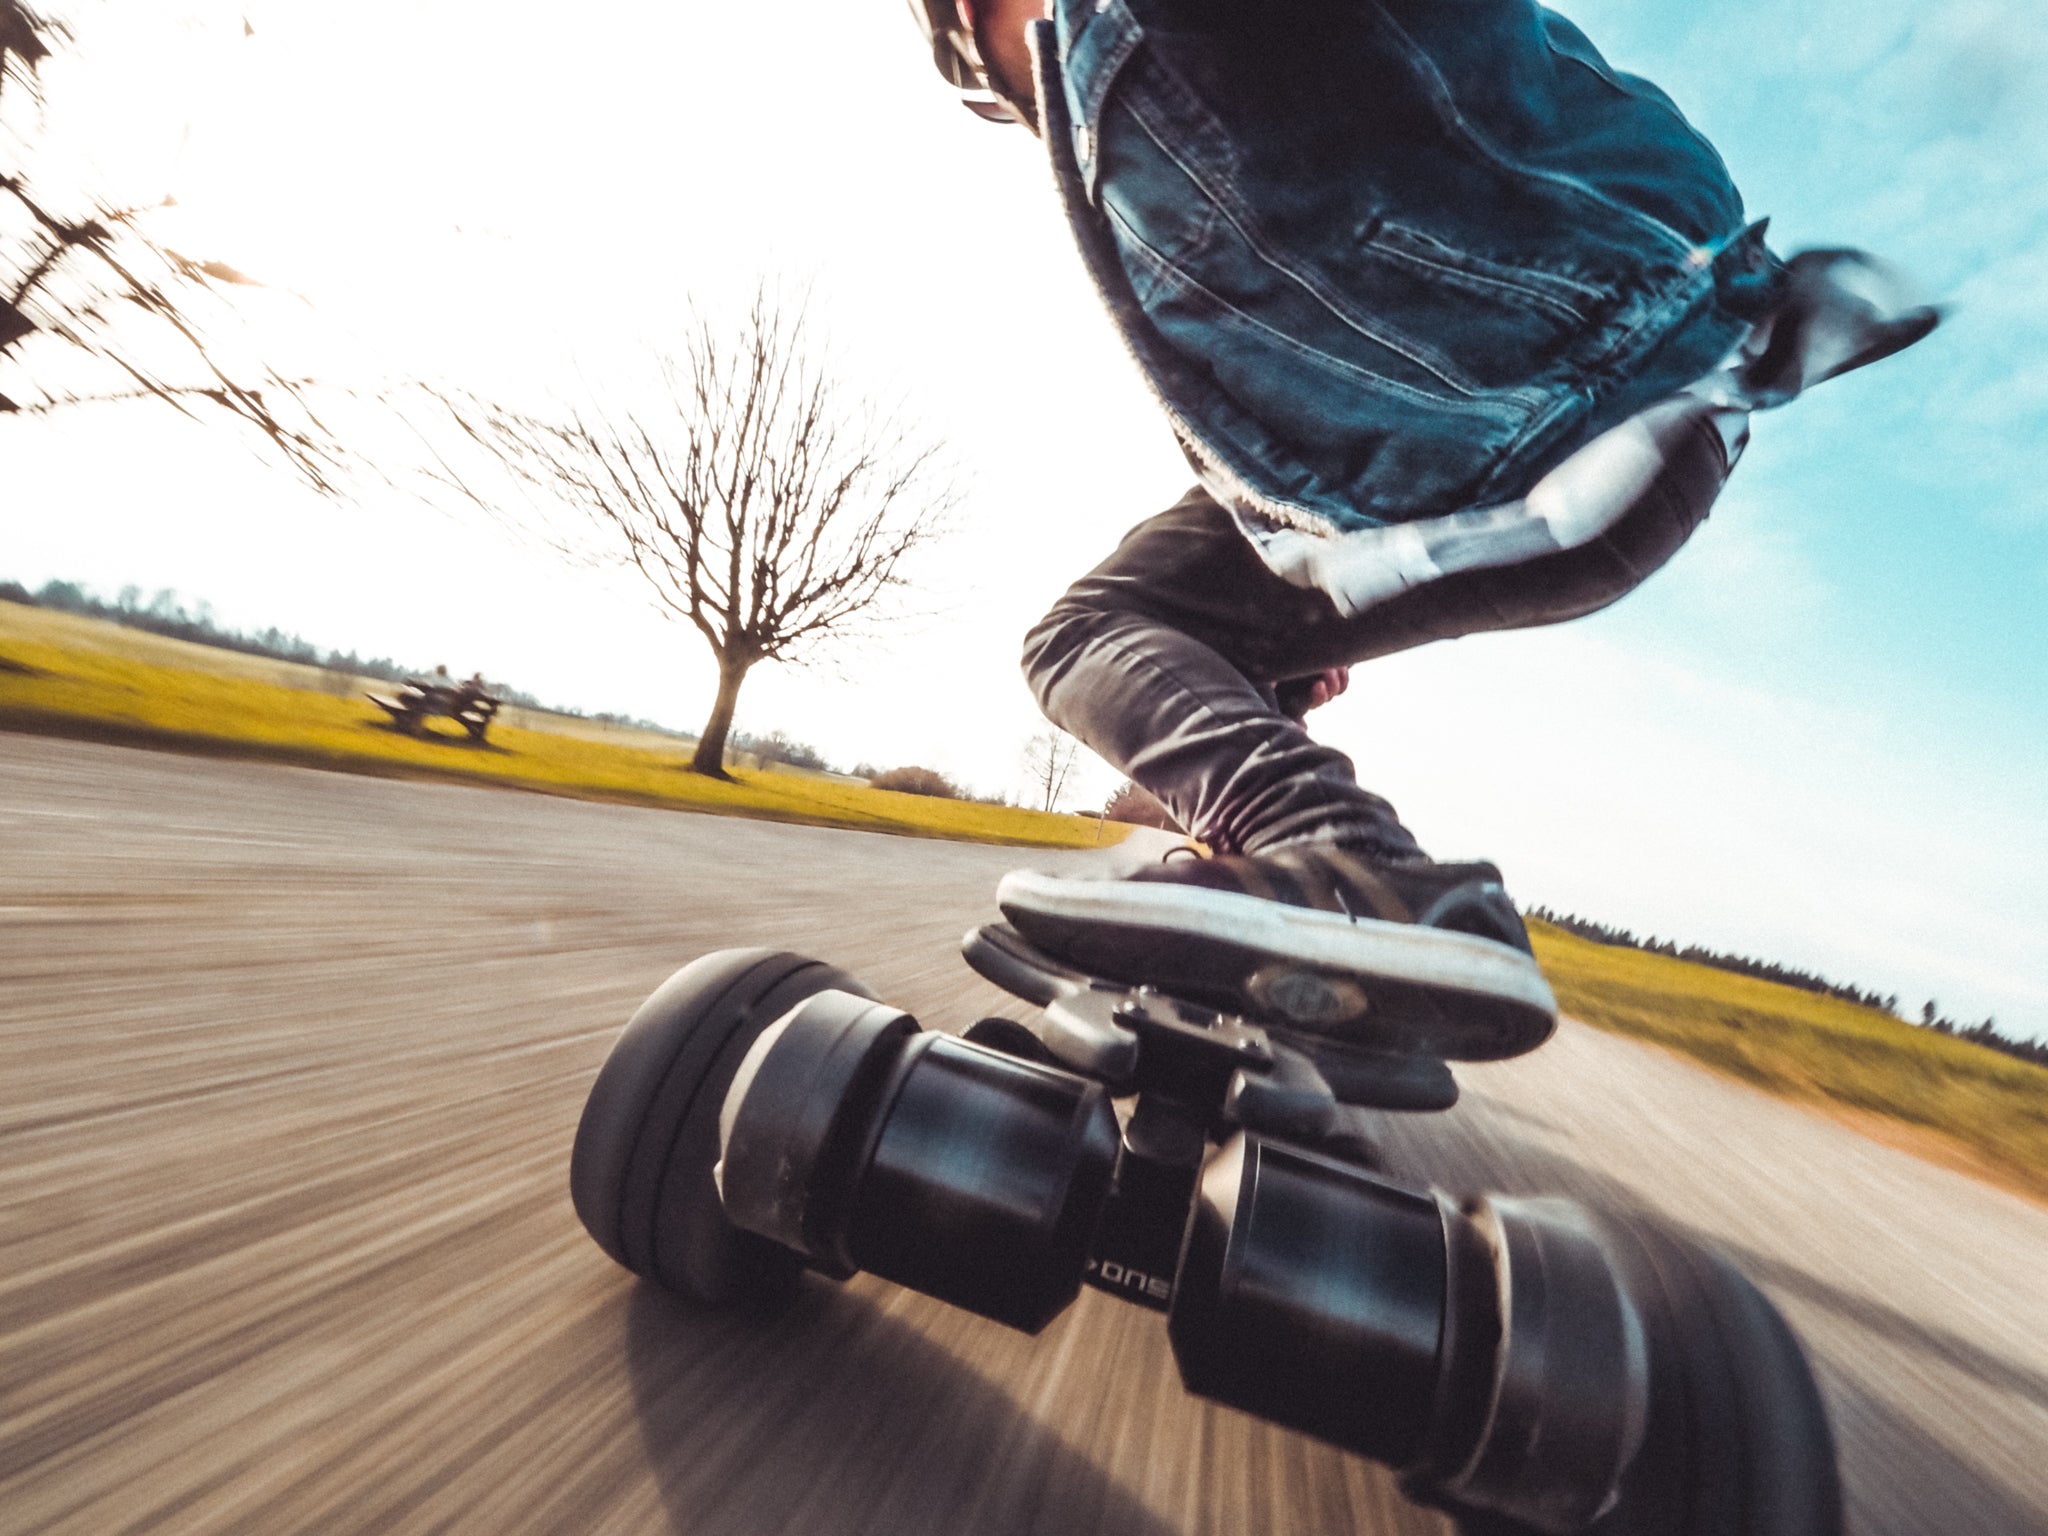 The best electric Skateboard 2 in 1. ONSRA Black Carve 2 Belt Drive with 115mm Rubber Wheels or 150mm AT wheels. Electric Longboard with double kingpin and Belt Drive.